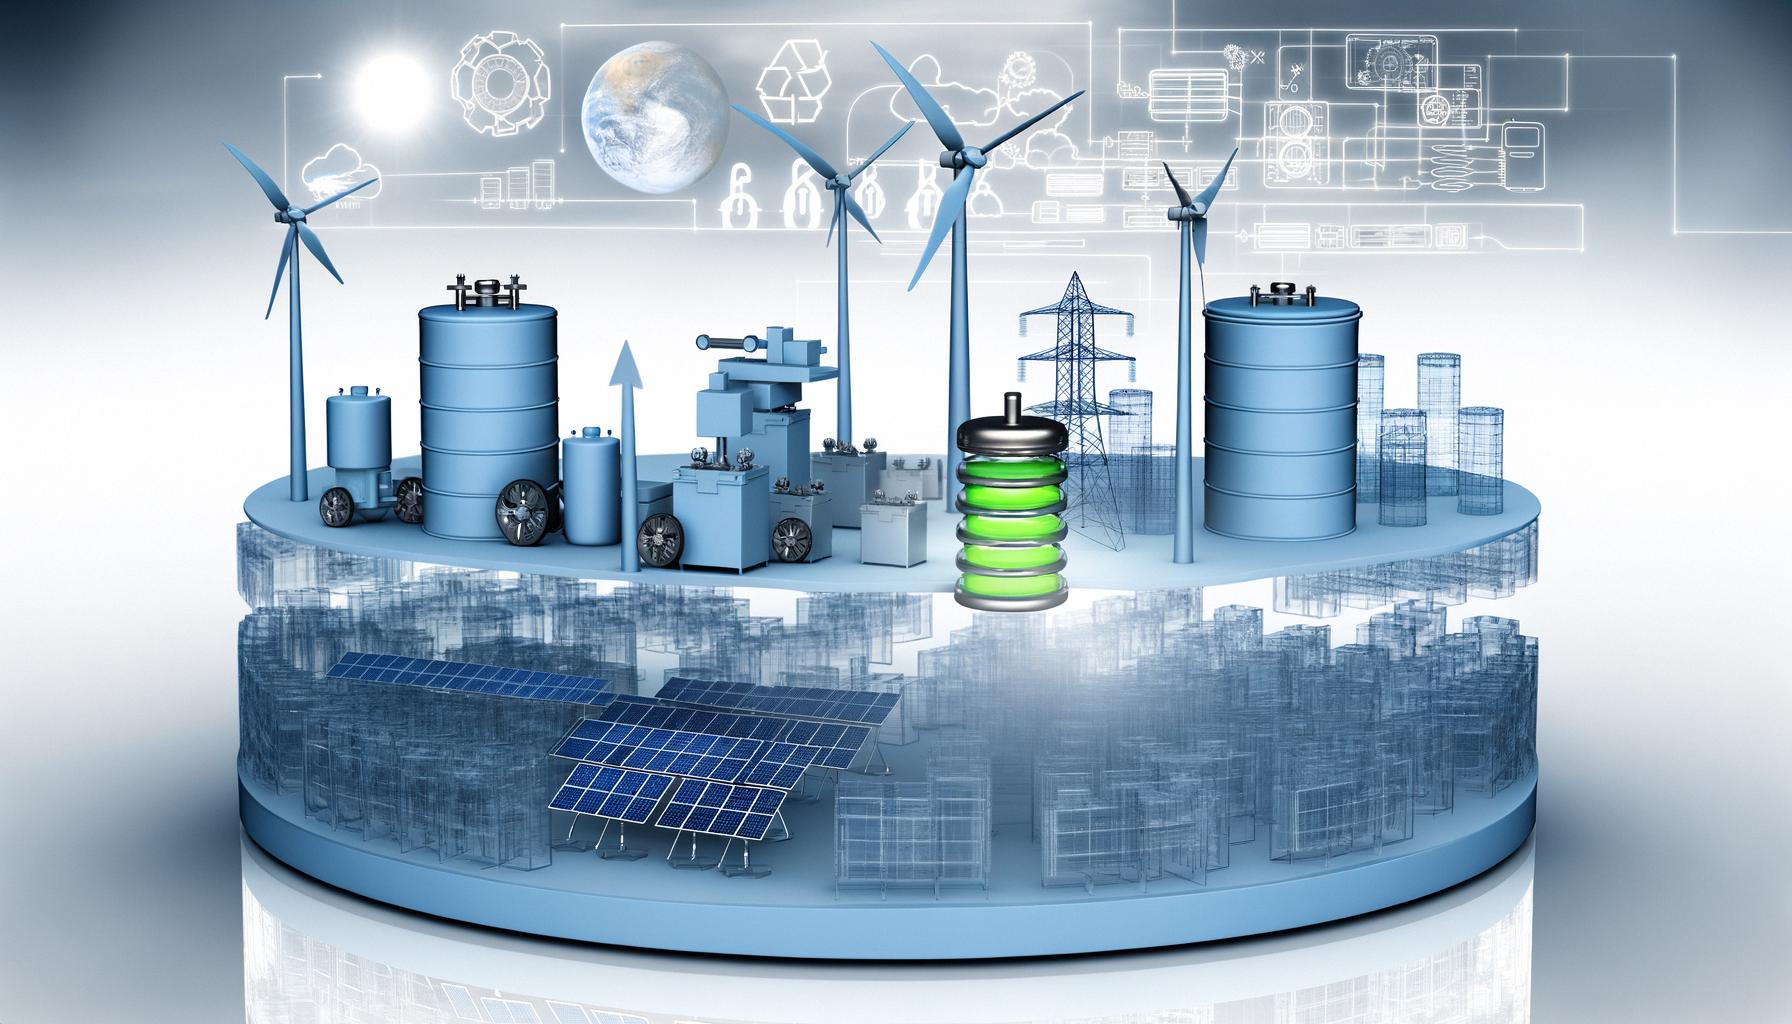 Energy storage innovations support the renewable energy transition with improved efficiency and safety.